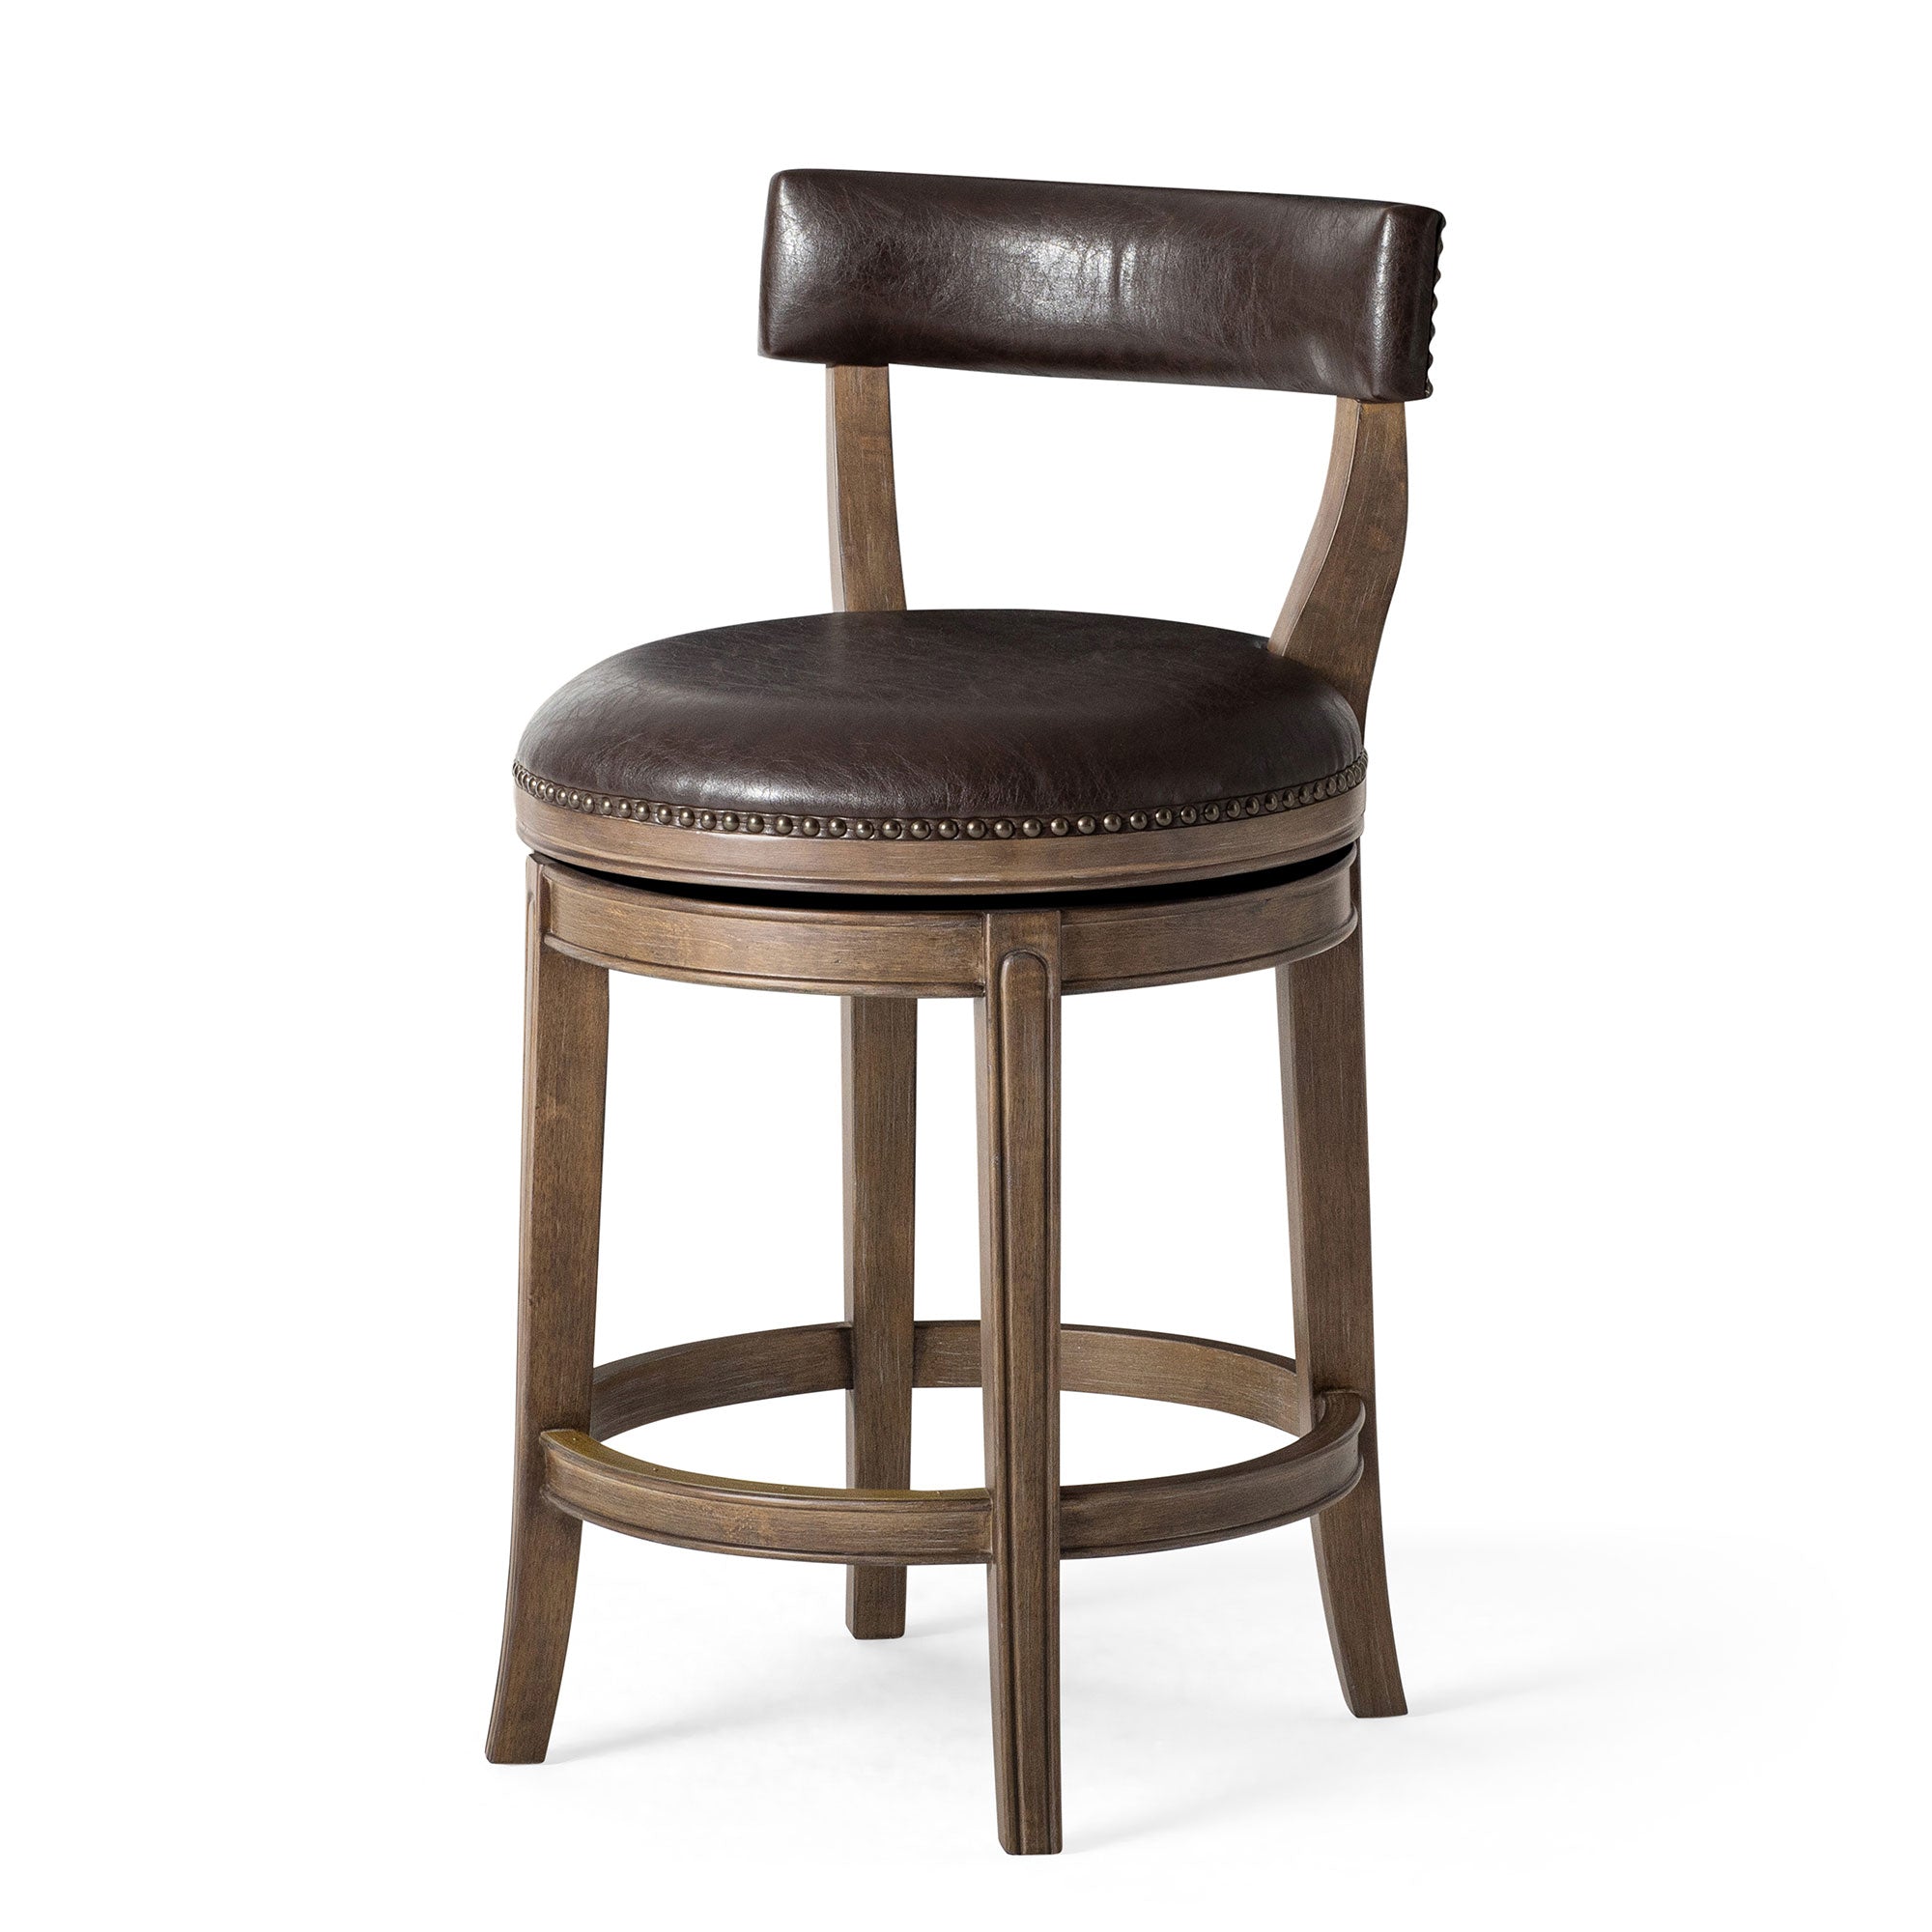 Alexander Counter Stool in Walnut Finish with Marksman Saddle Vegan Leather in Stools by Maven Lane